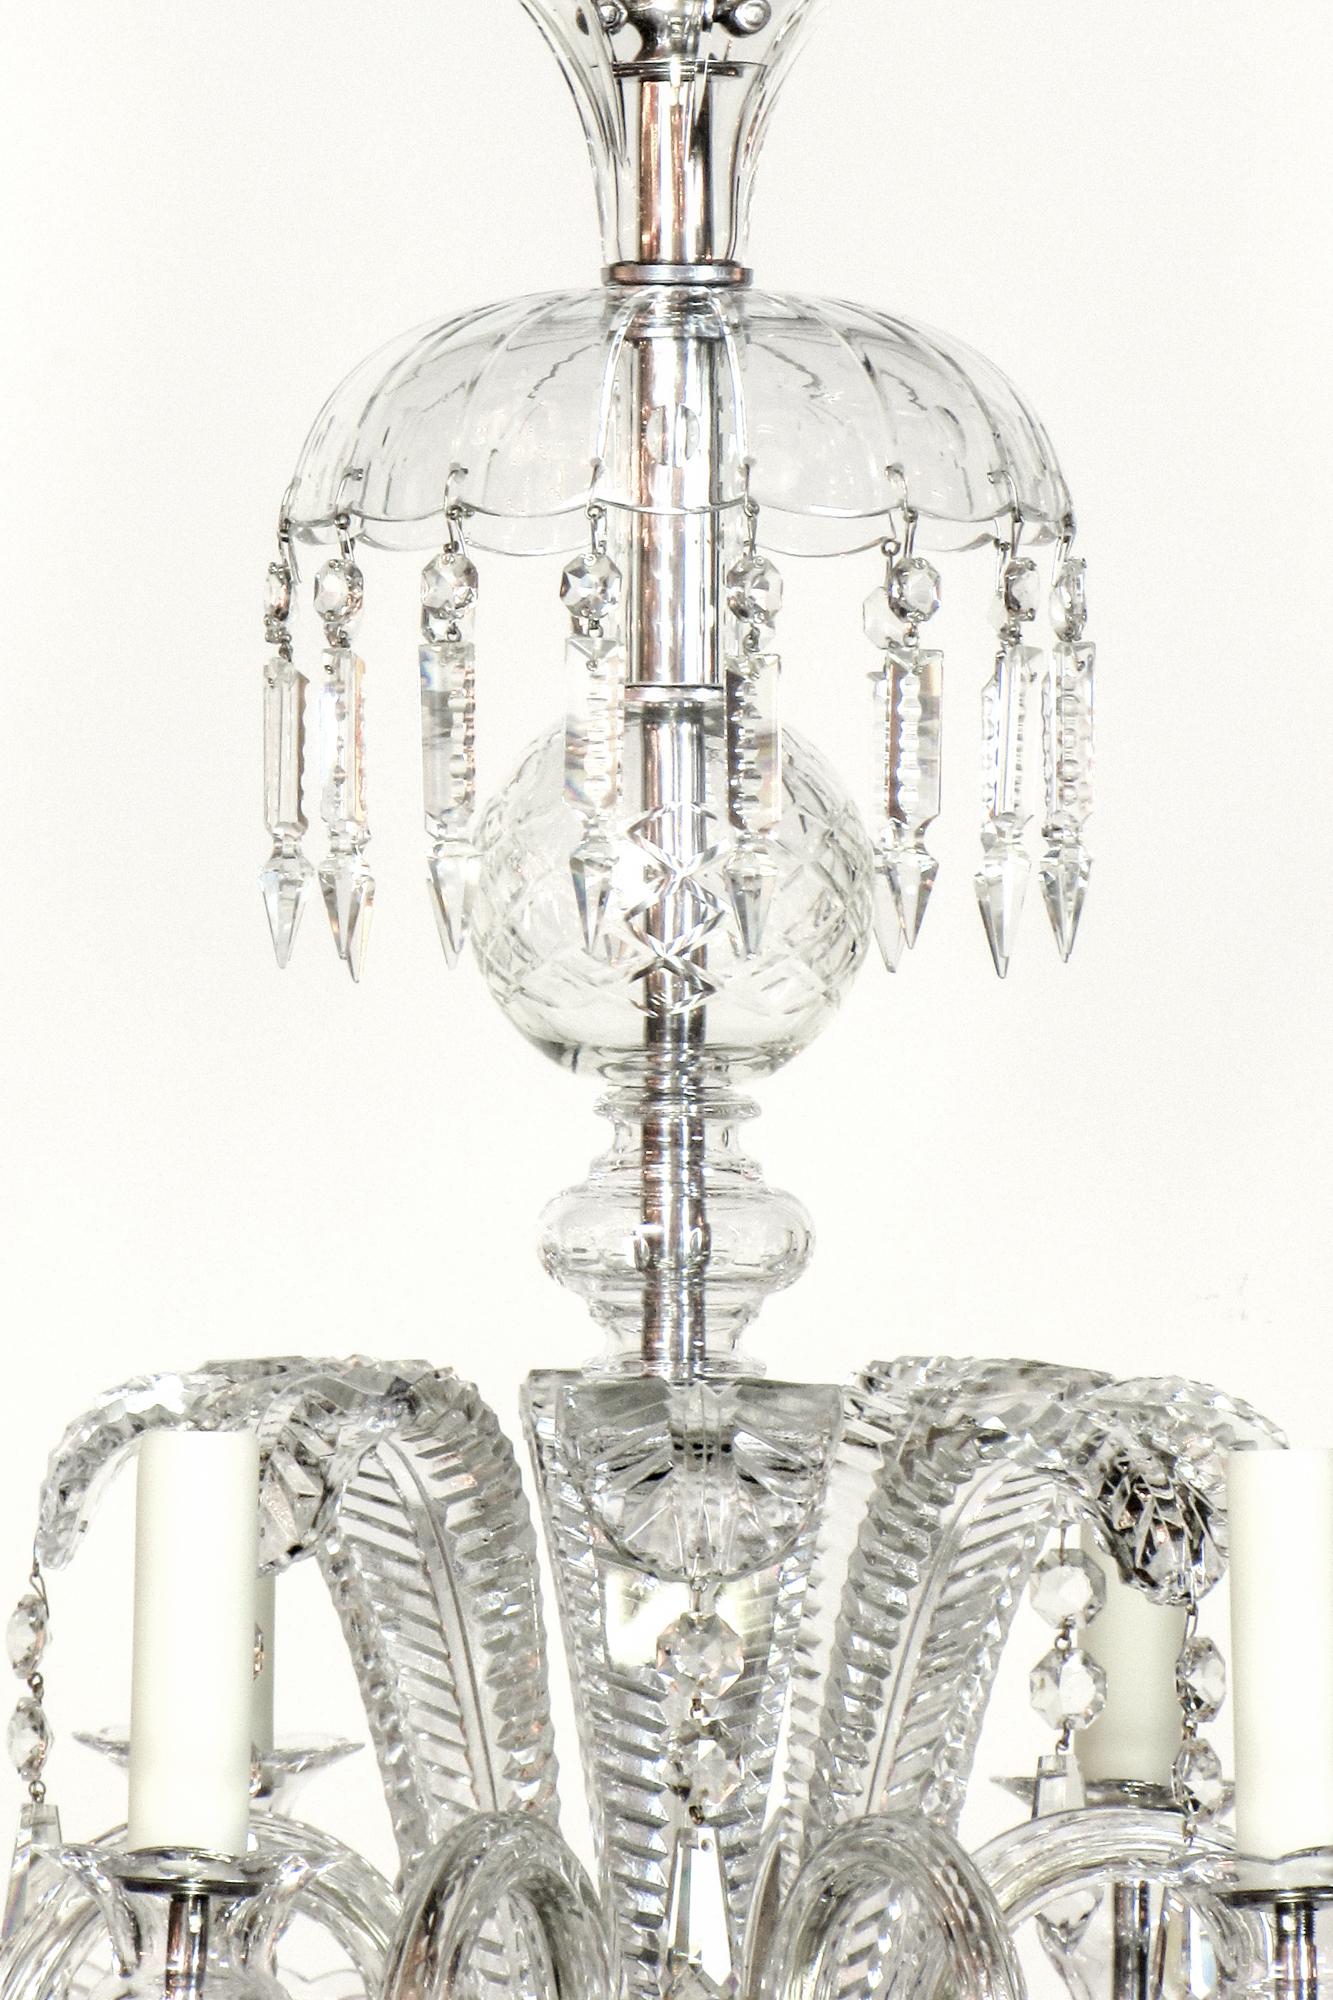 Early 20th century ostrich feather crystal chandelier.  Eight arm crystal chandelier with crystal ostrich feather plumes. Top crown is hung with cut spear crystals.  Stem pieces are cut clear crystal.  Ostrich feather shaped crystals add a decadence